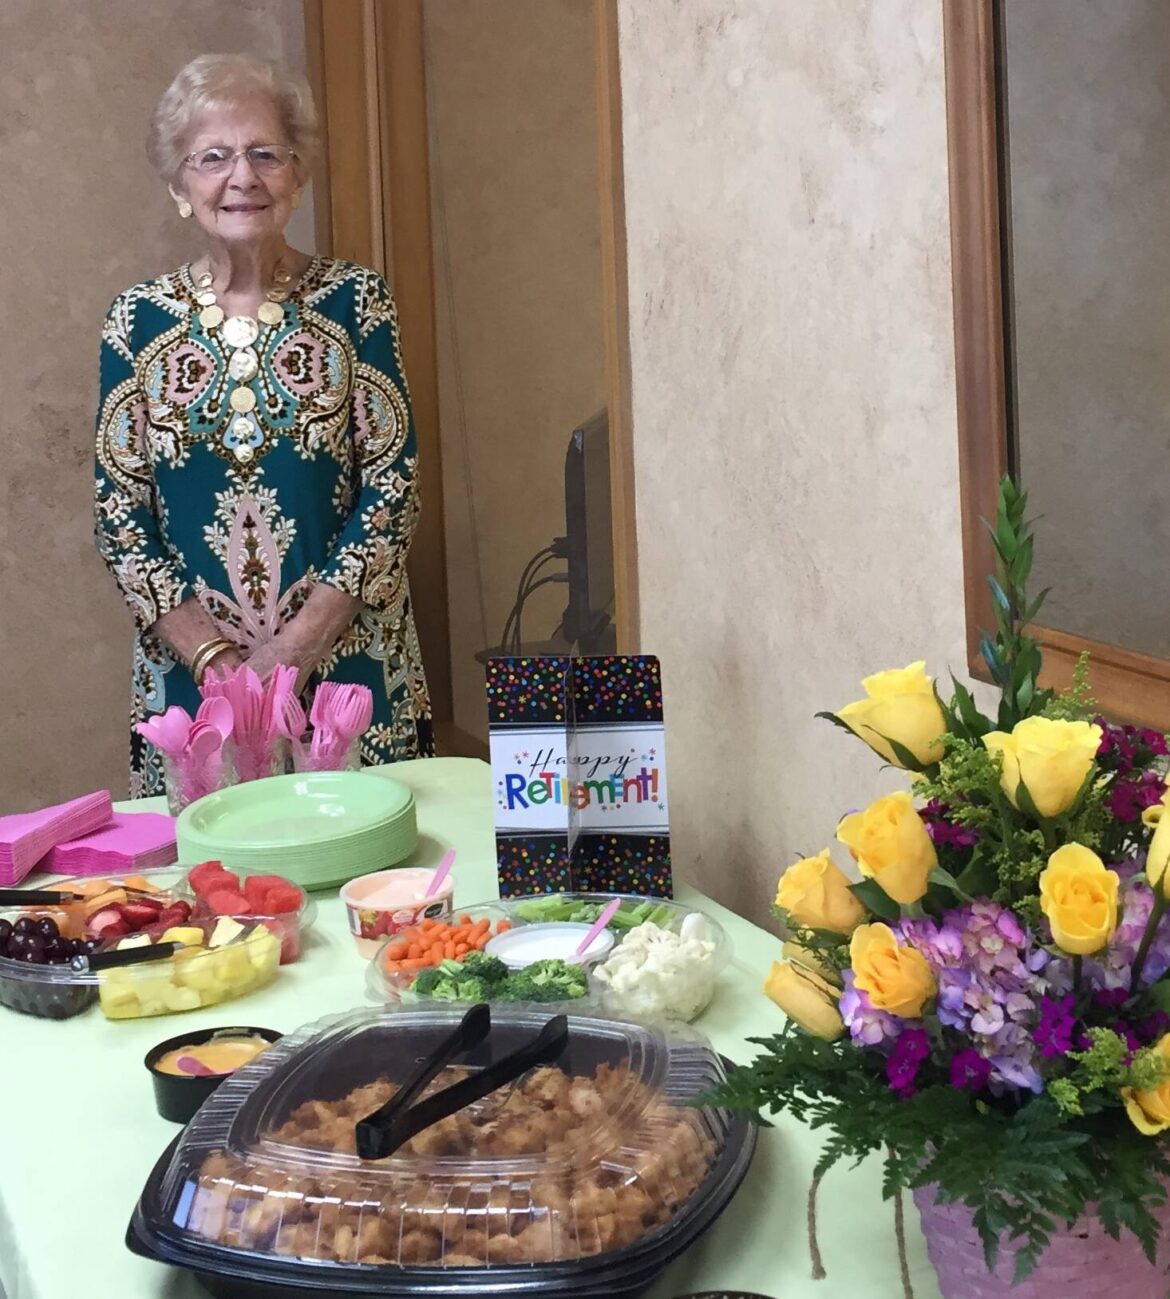 Ninety-three-year-old Southsider retires for the third time